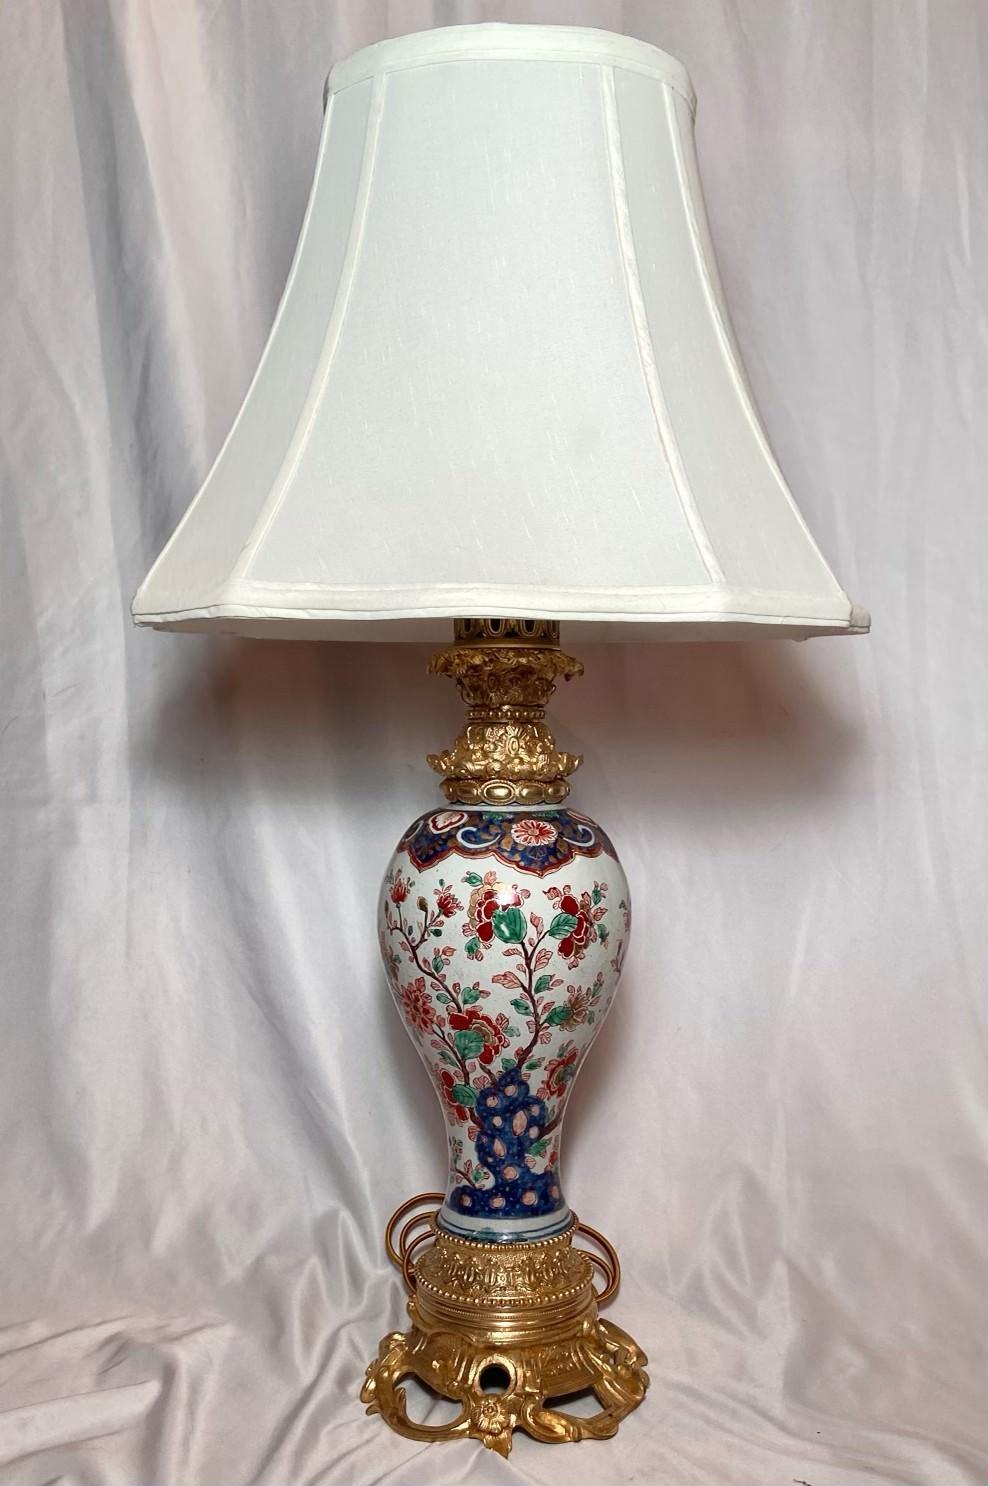 Pair of antique early 19th century ormolu mounted Imari Porcelain urn lamps.